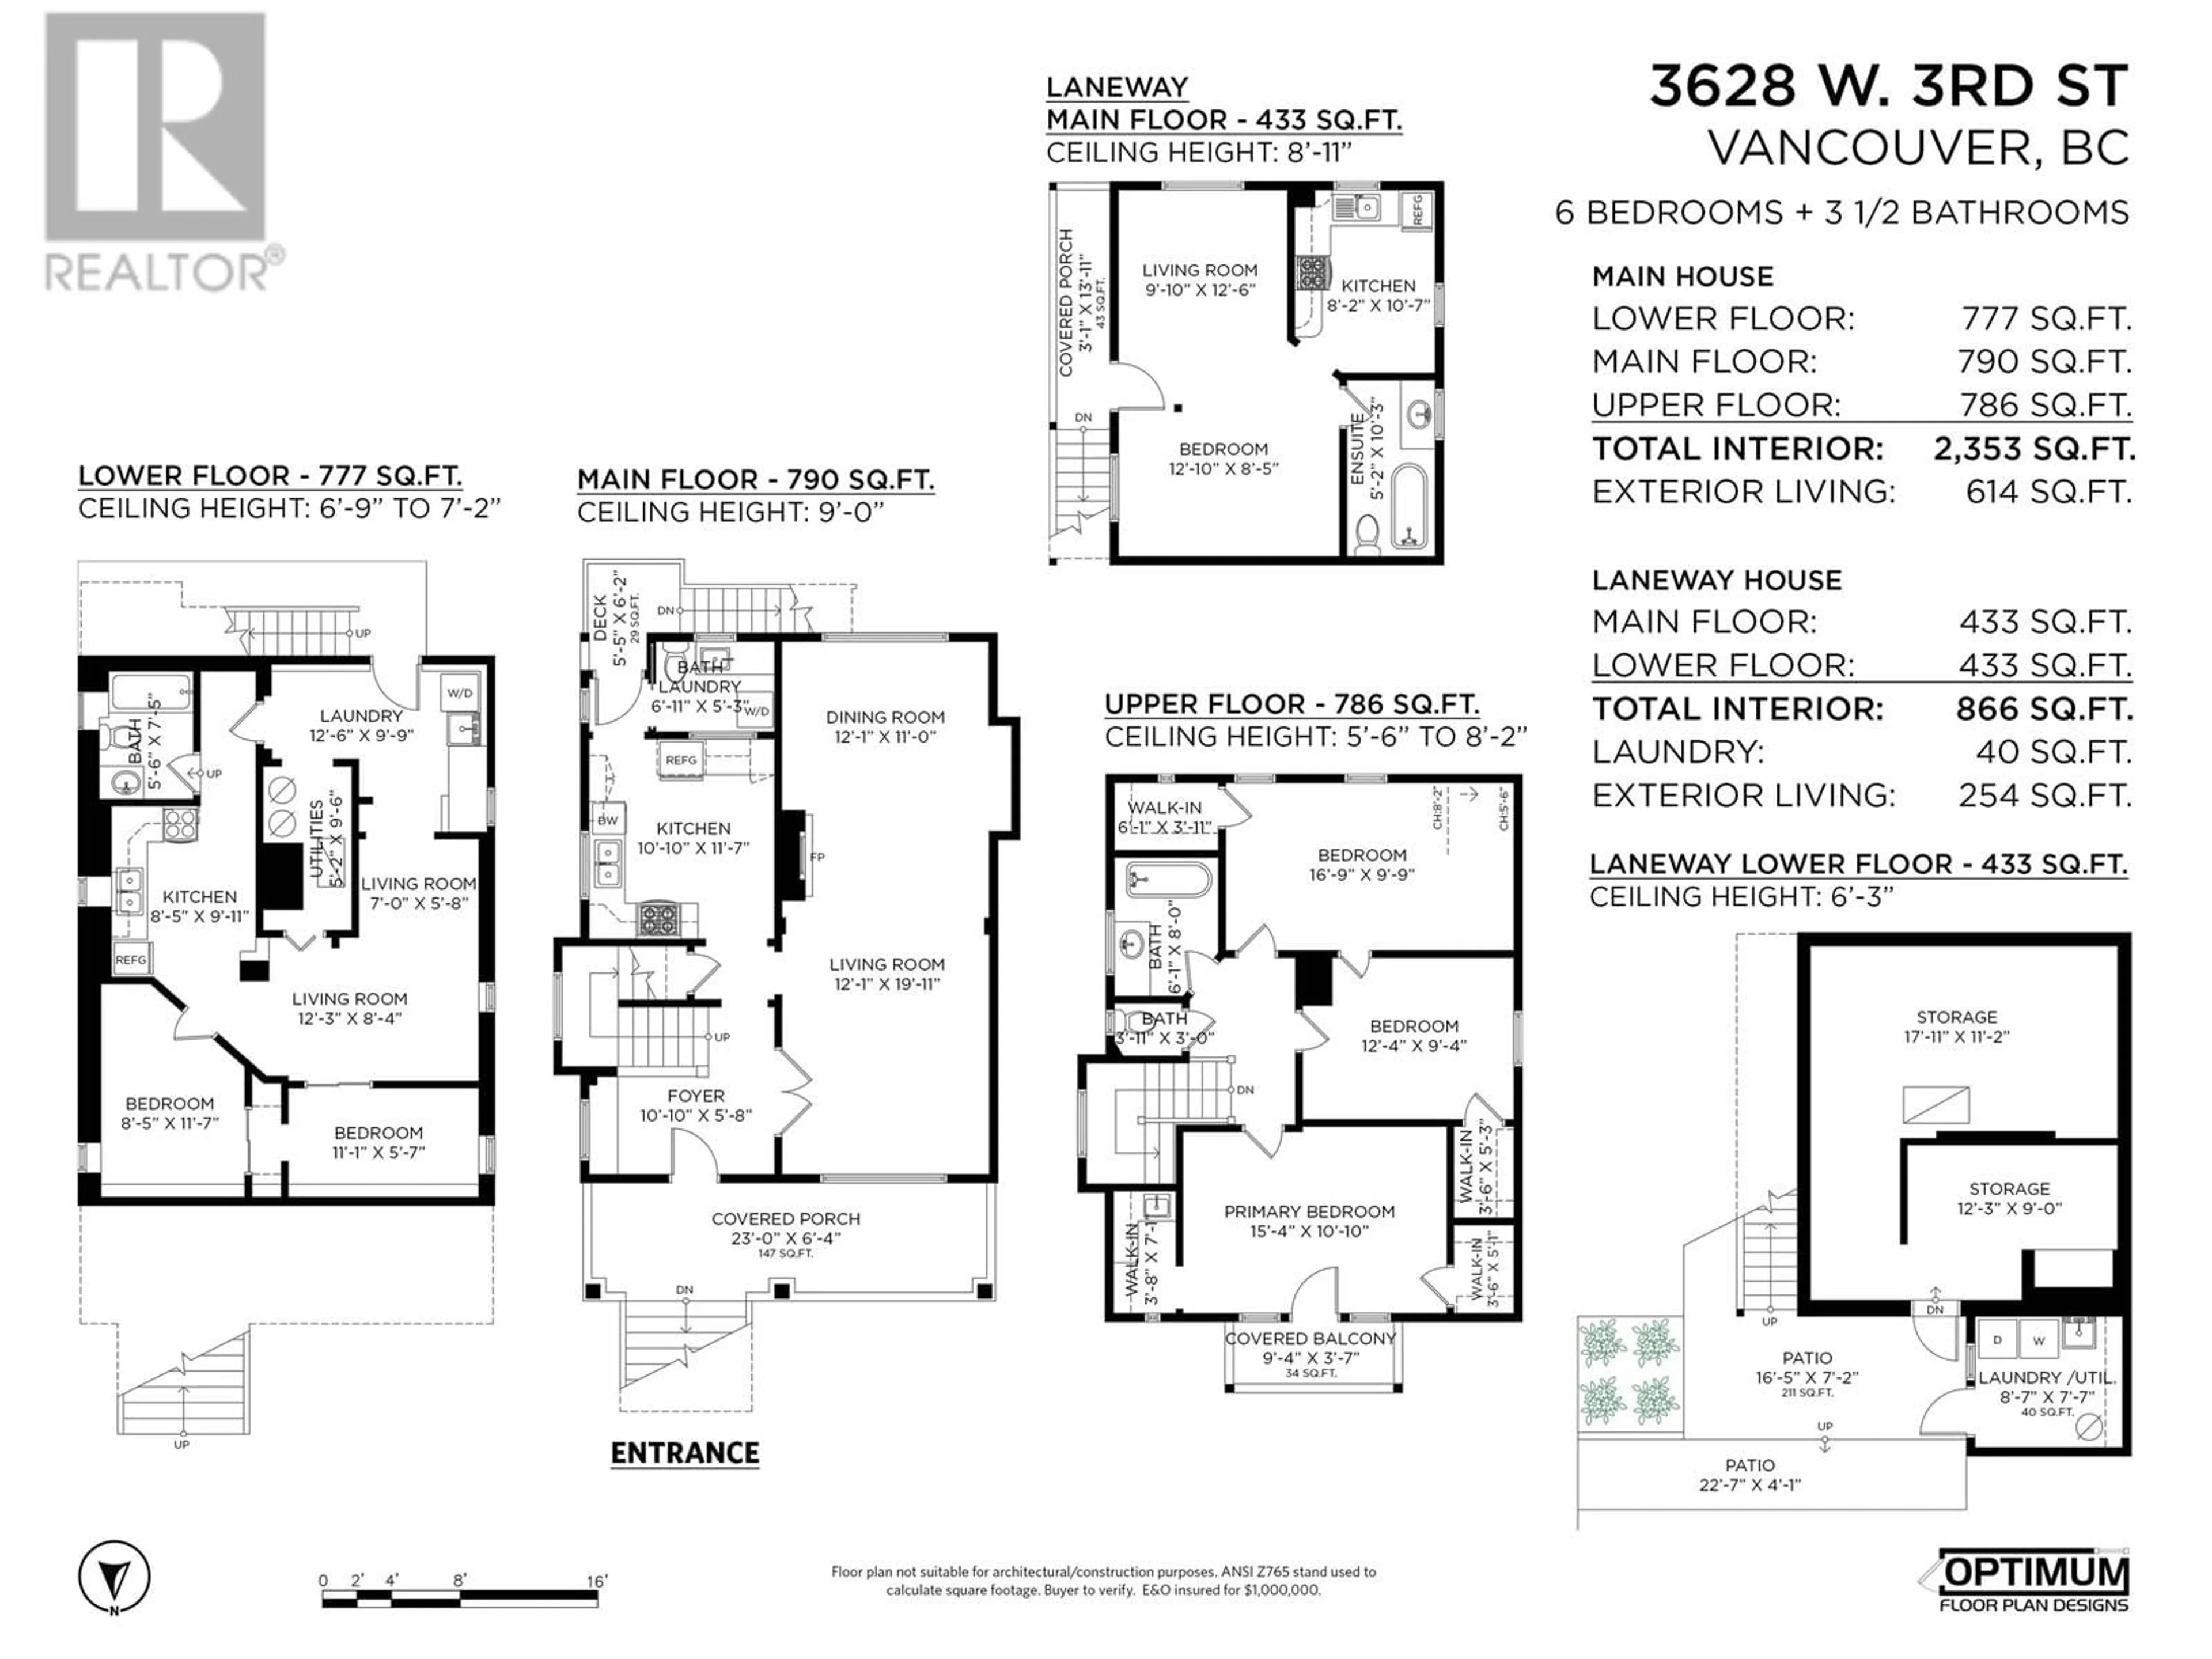 Floor plan for 3628 W 3RD AVENUE, Vancouver British Columbia V6R1L9